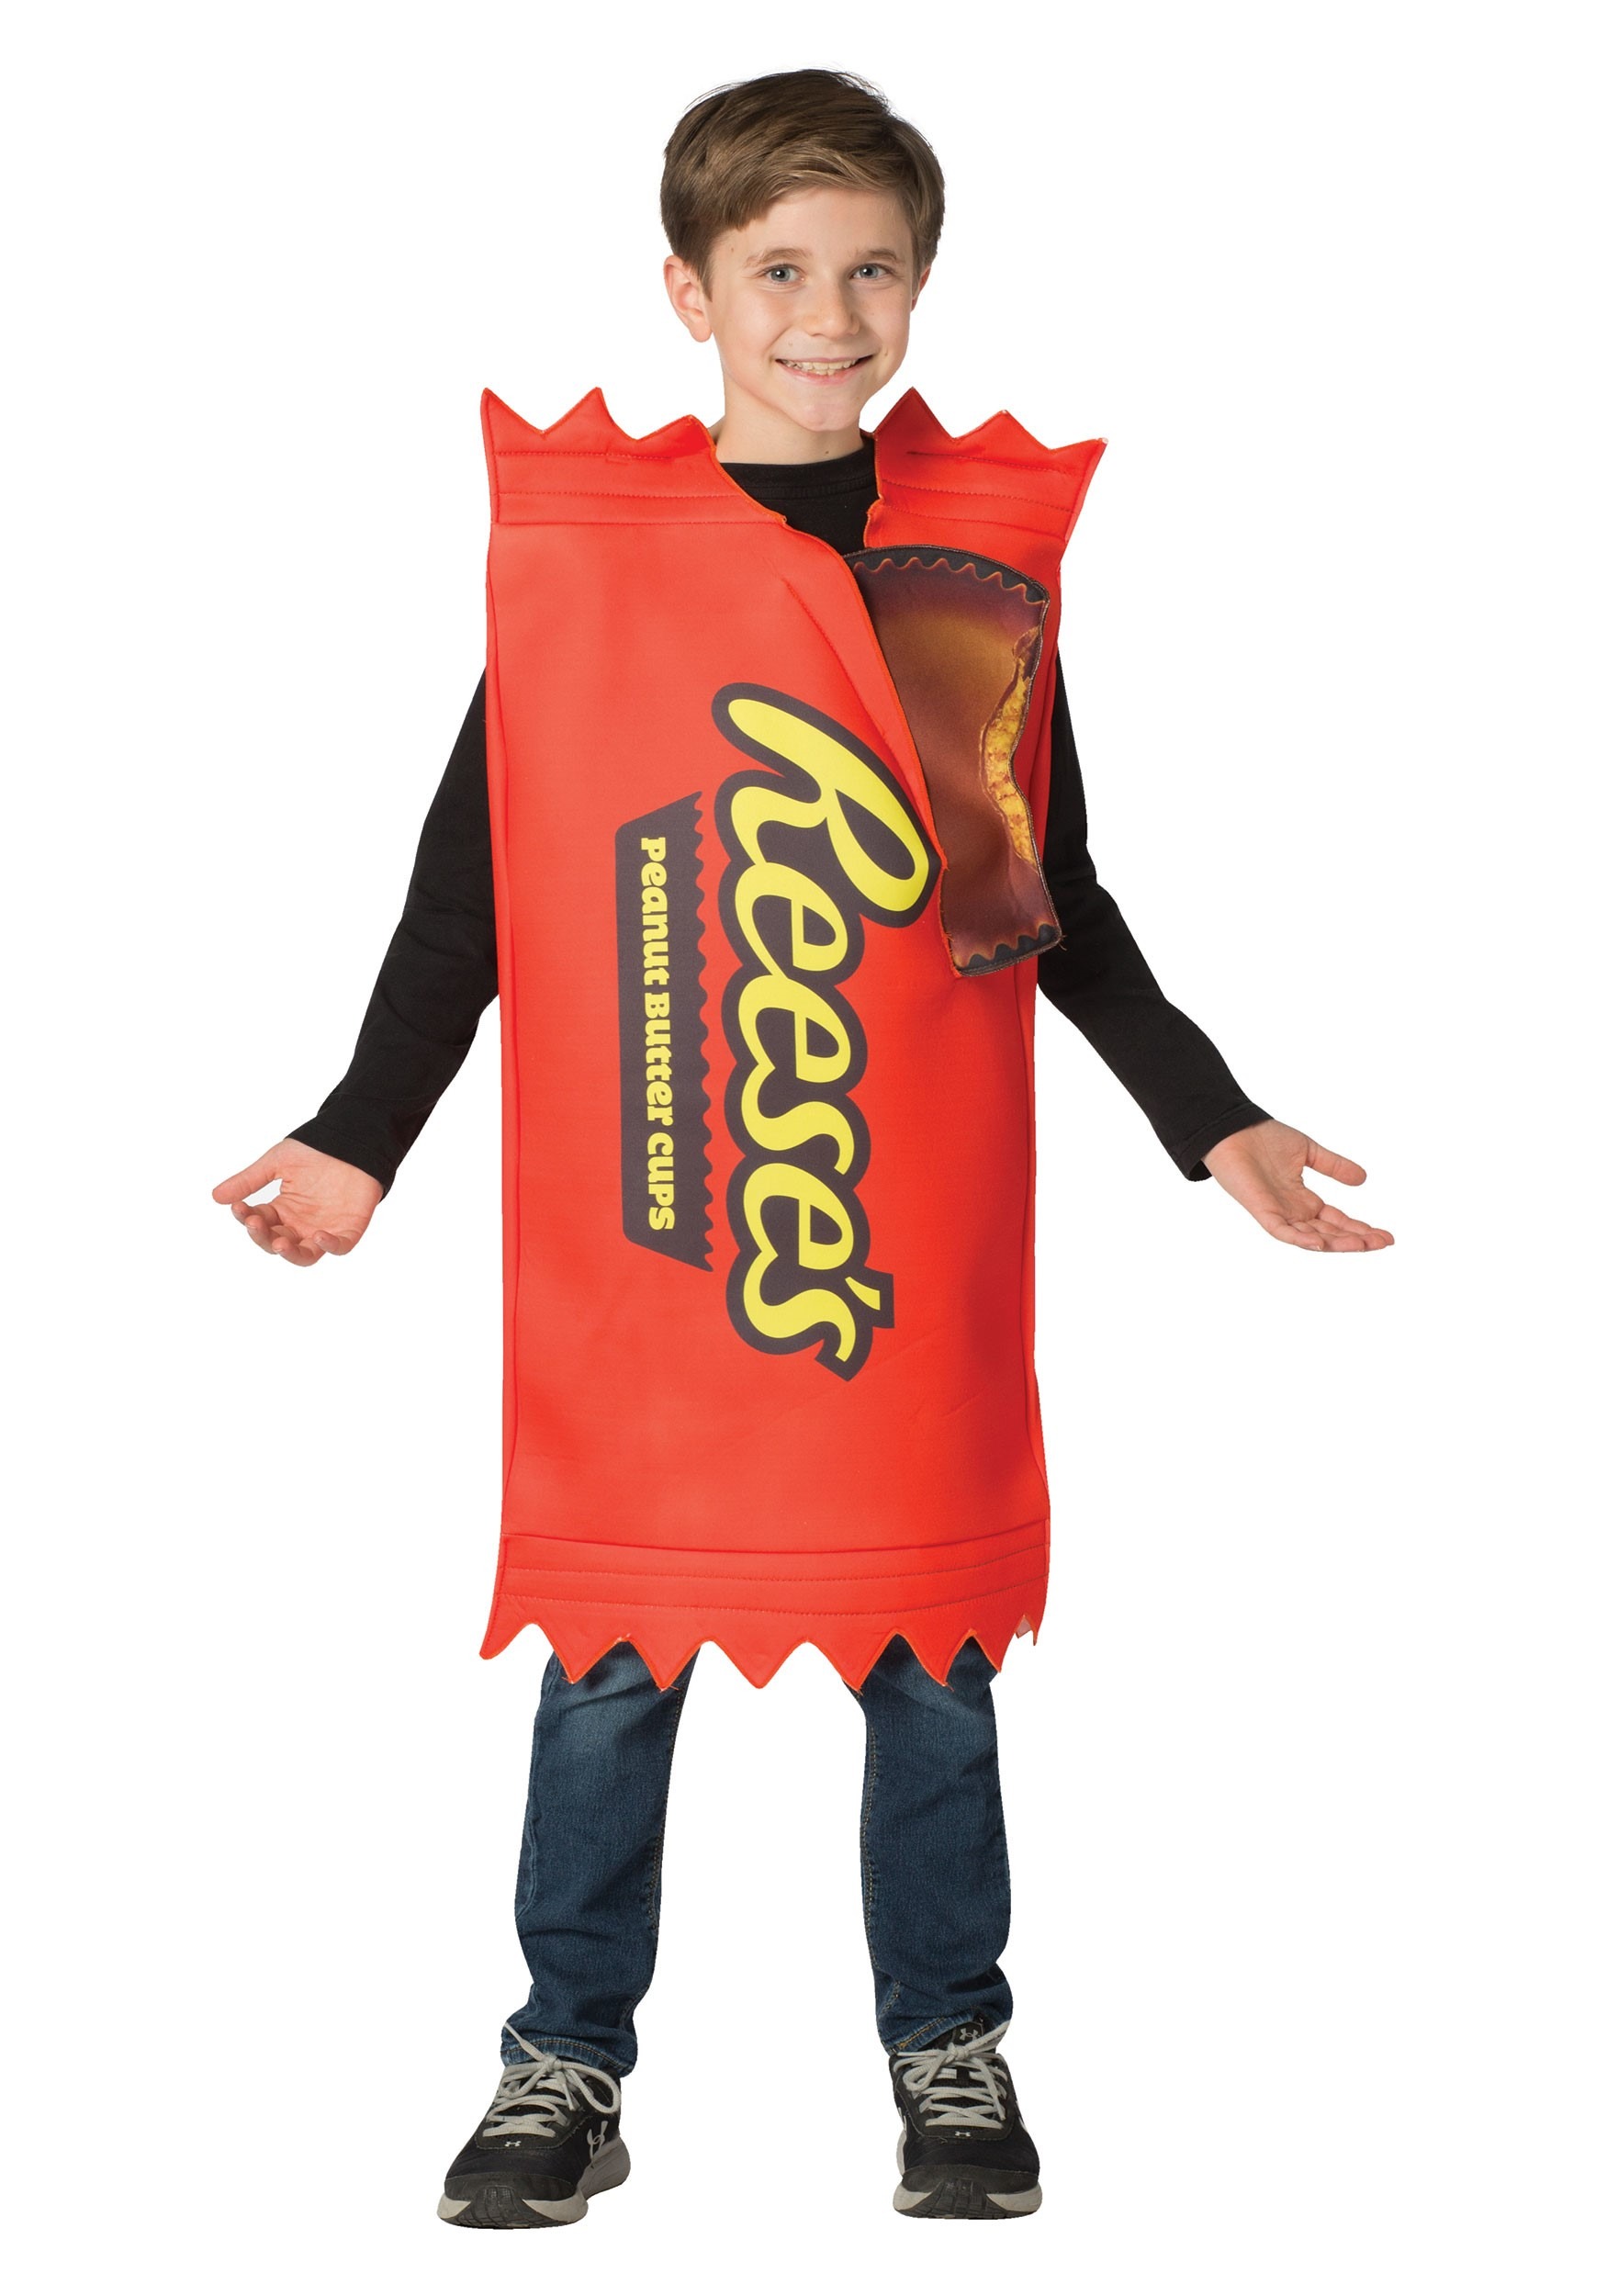 Reese's Kids Reese's Cup 2 paquete Multicolor Colombia